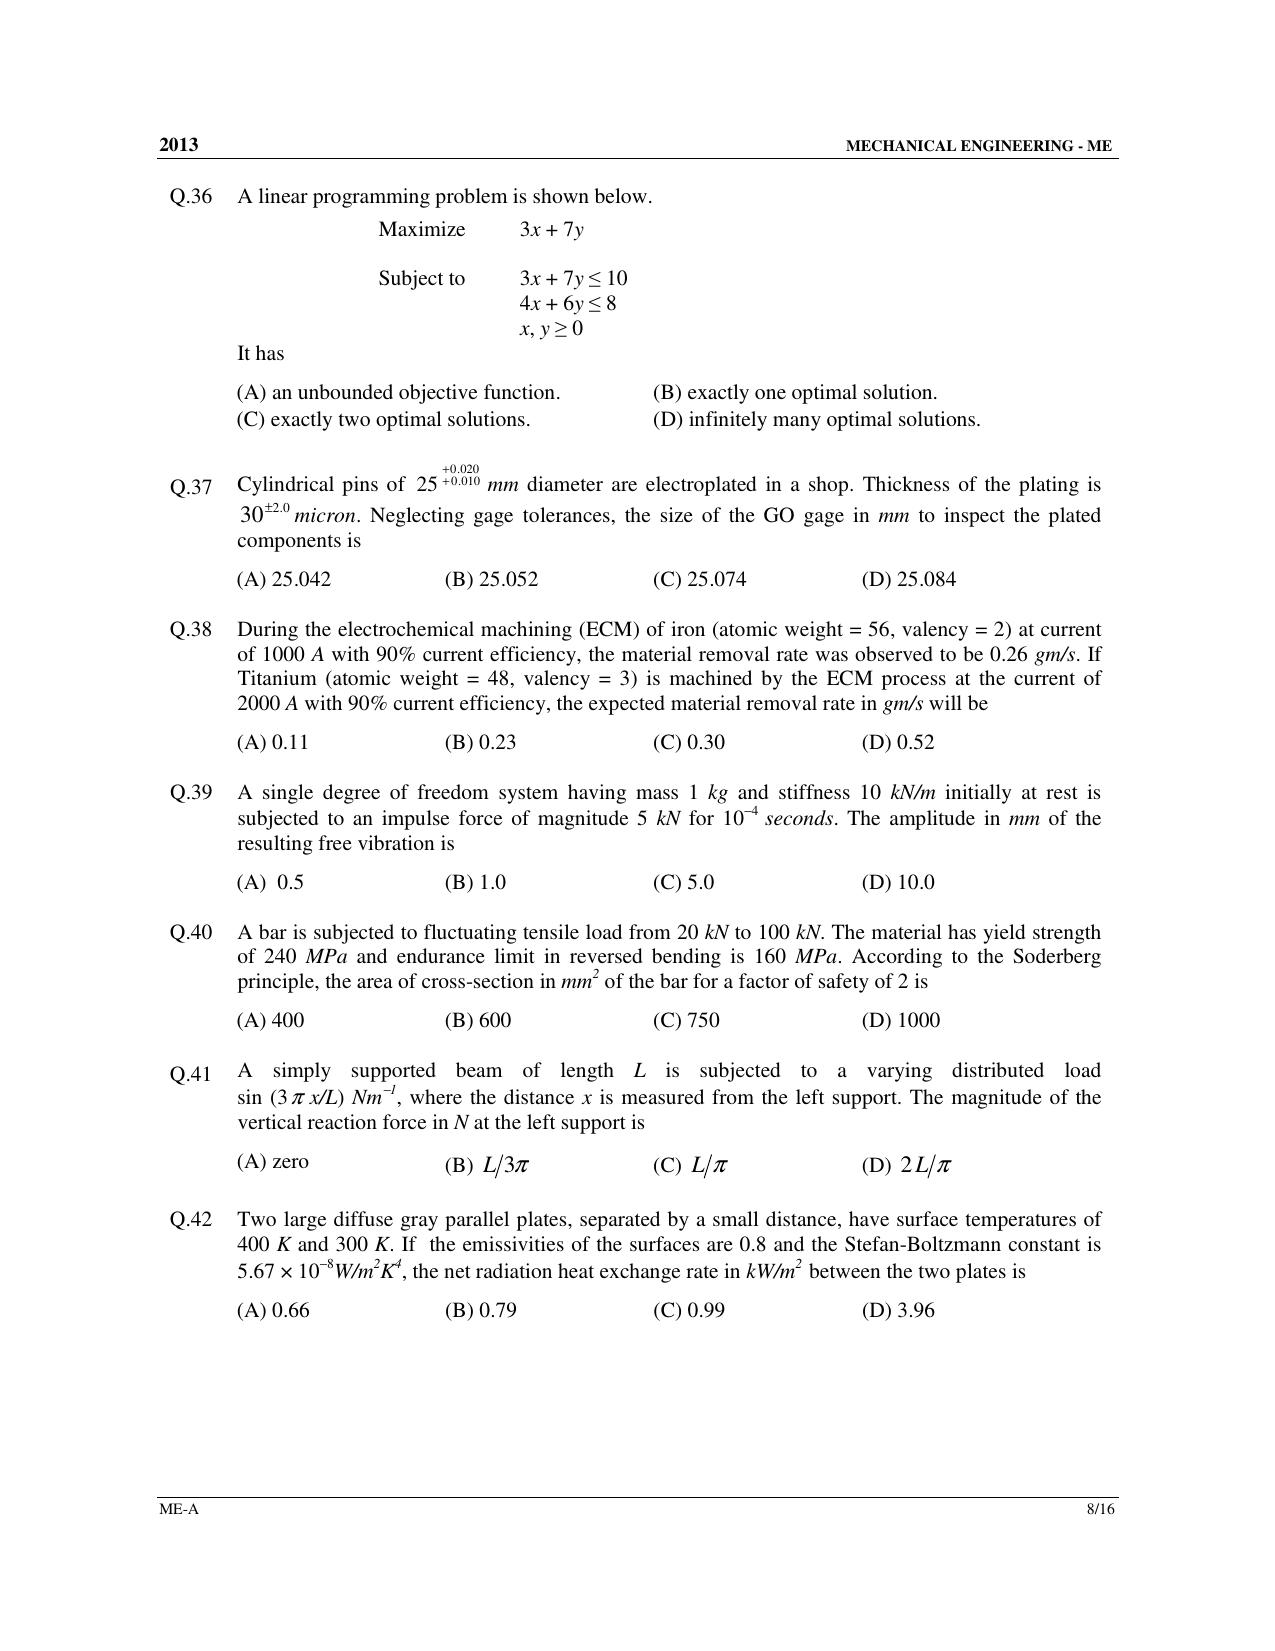 GATE 2013 Mechanical Engineering (ME) Question Paper with Answer Key - Page 9